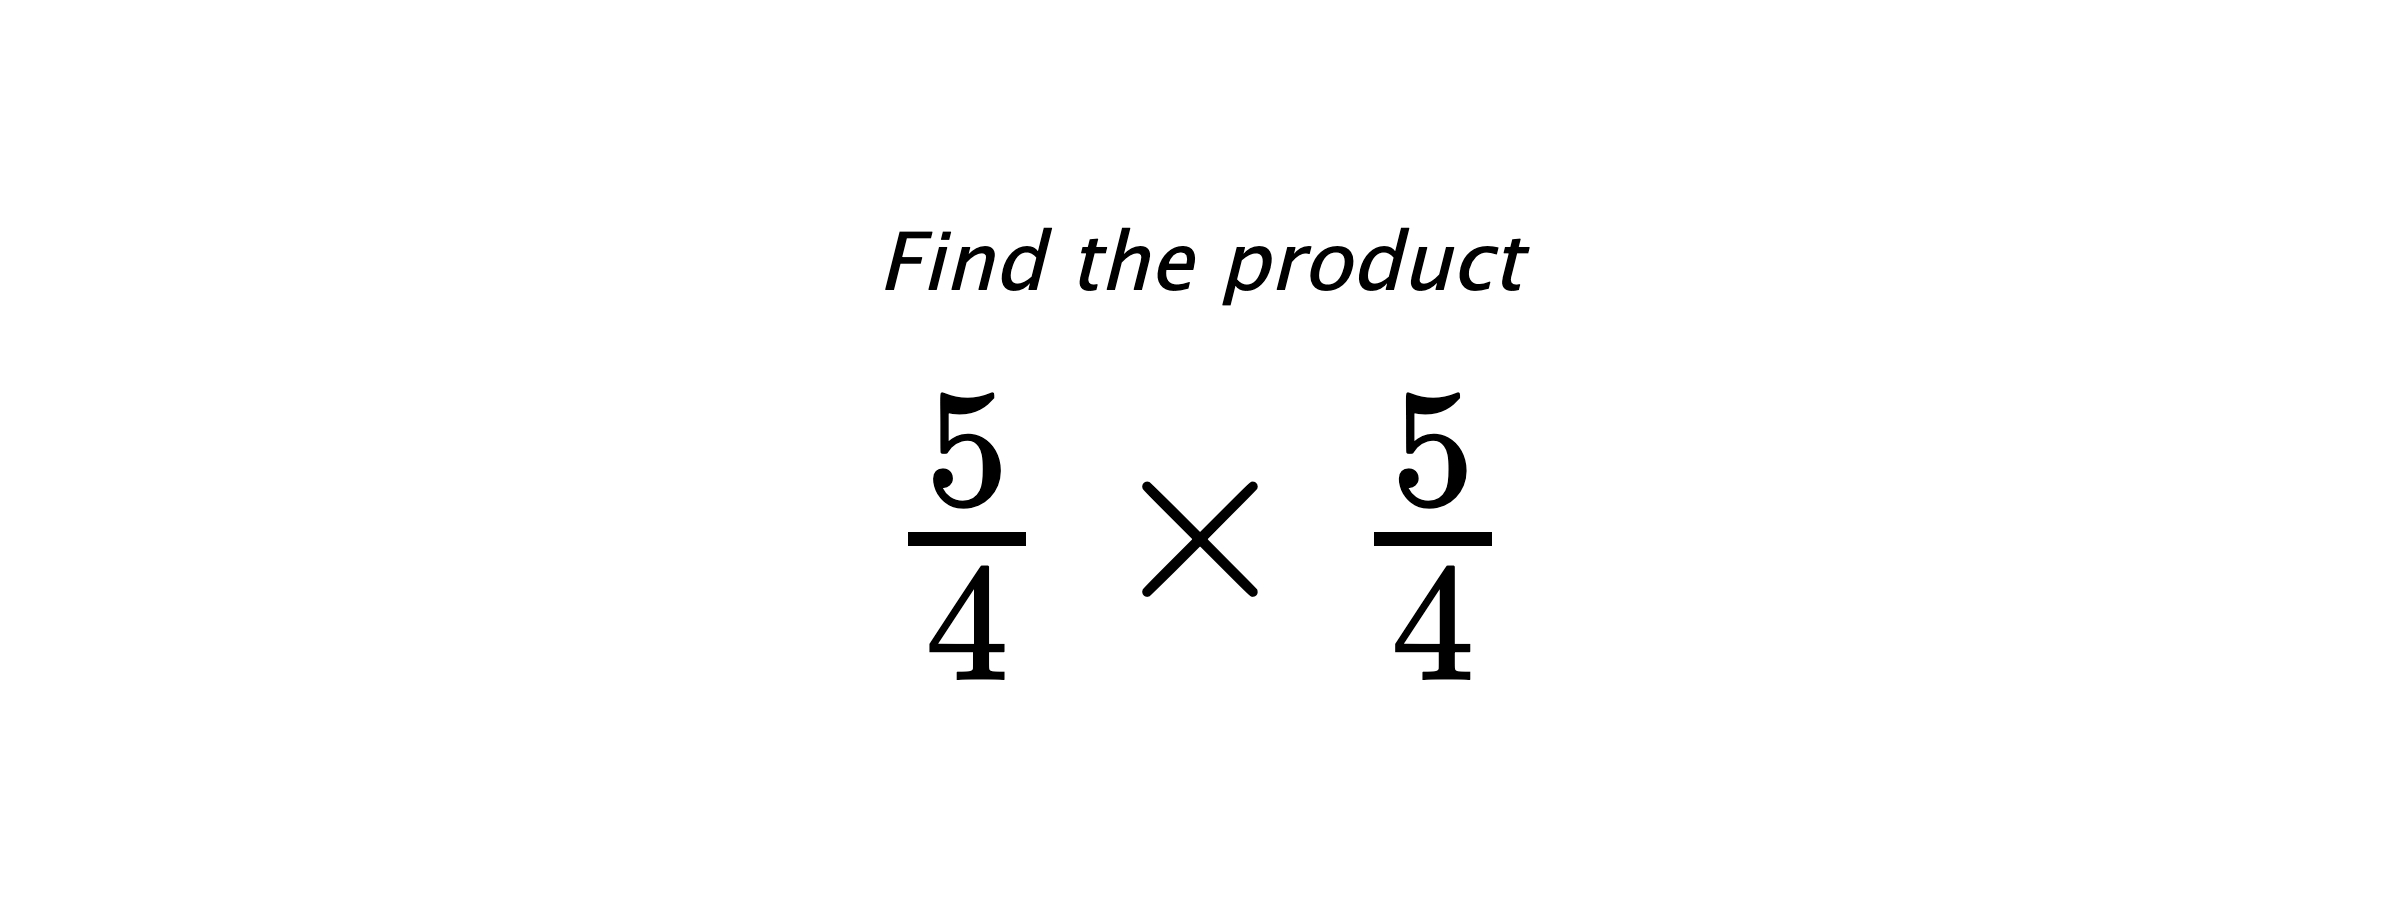 Find the product $ \frac{5}{4} \times \frac{5}{4} $